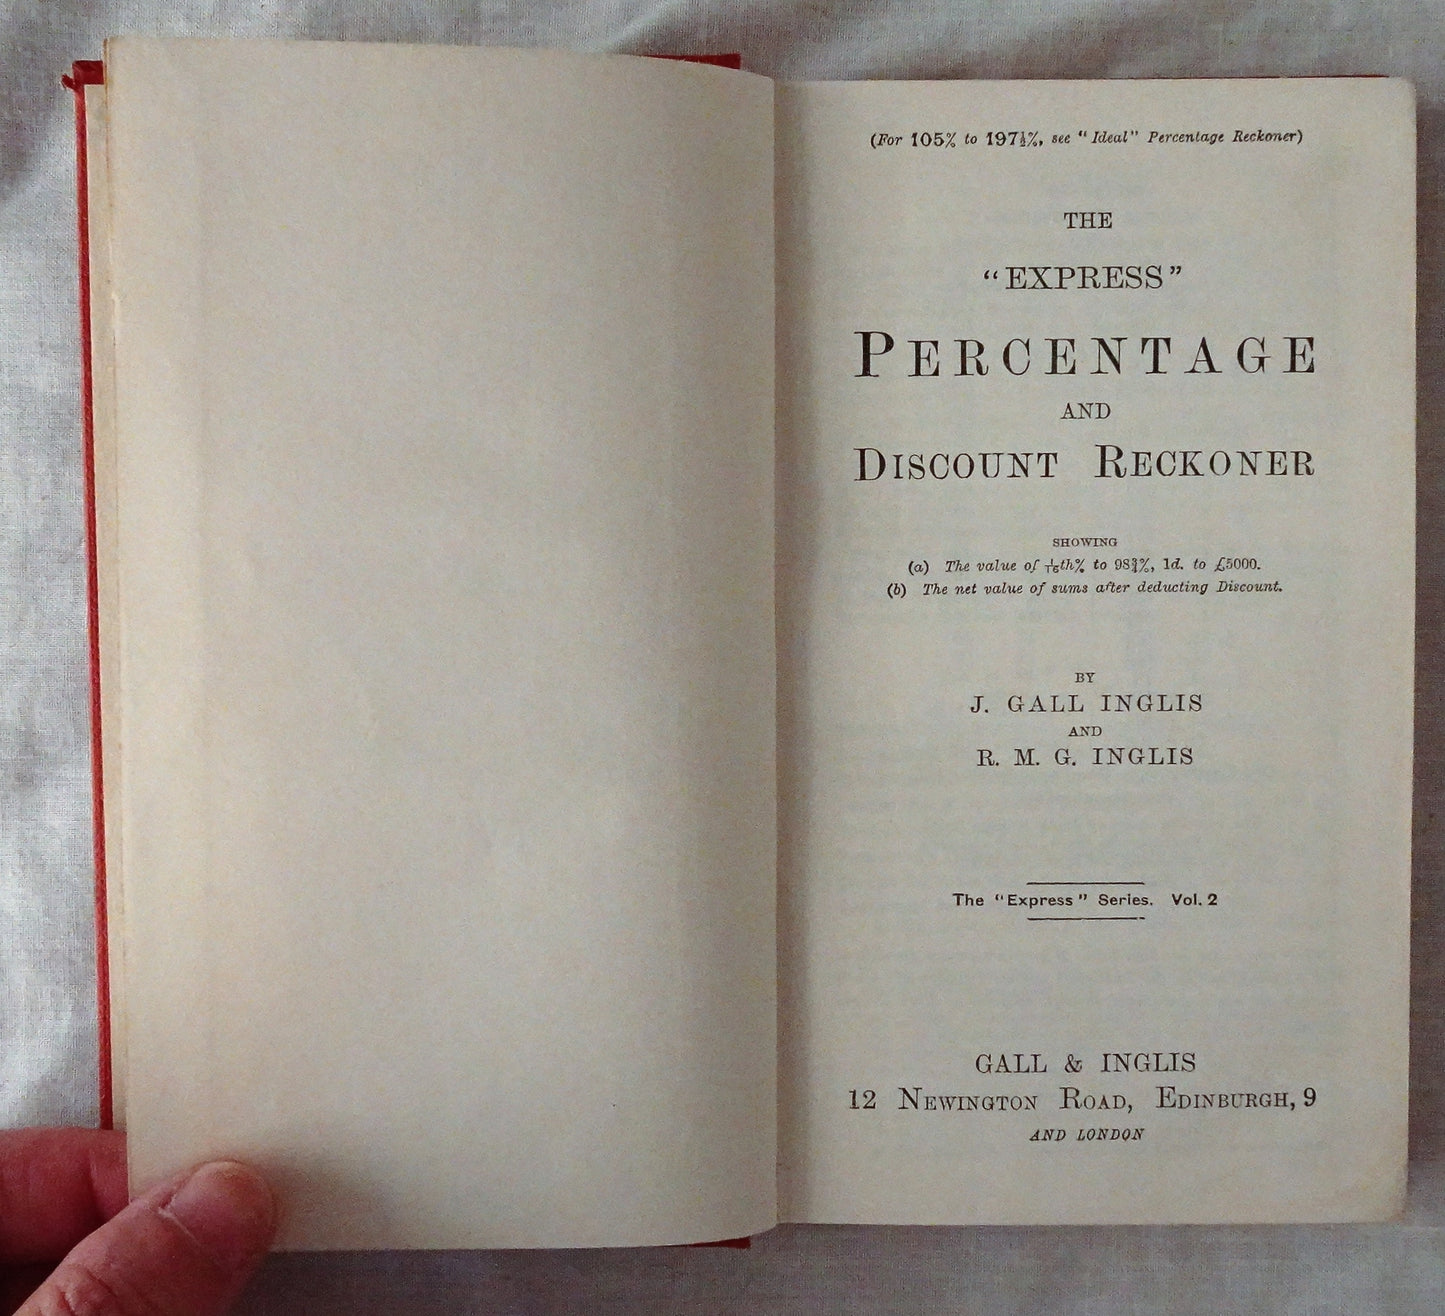 The Express Percentage Discount and Reckoner by J. Gall Inglis and R. M. G. Inglis